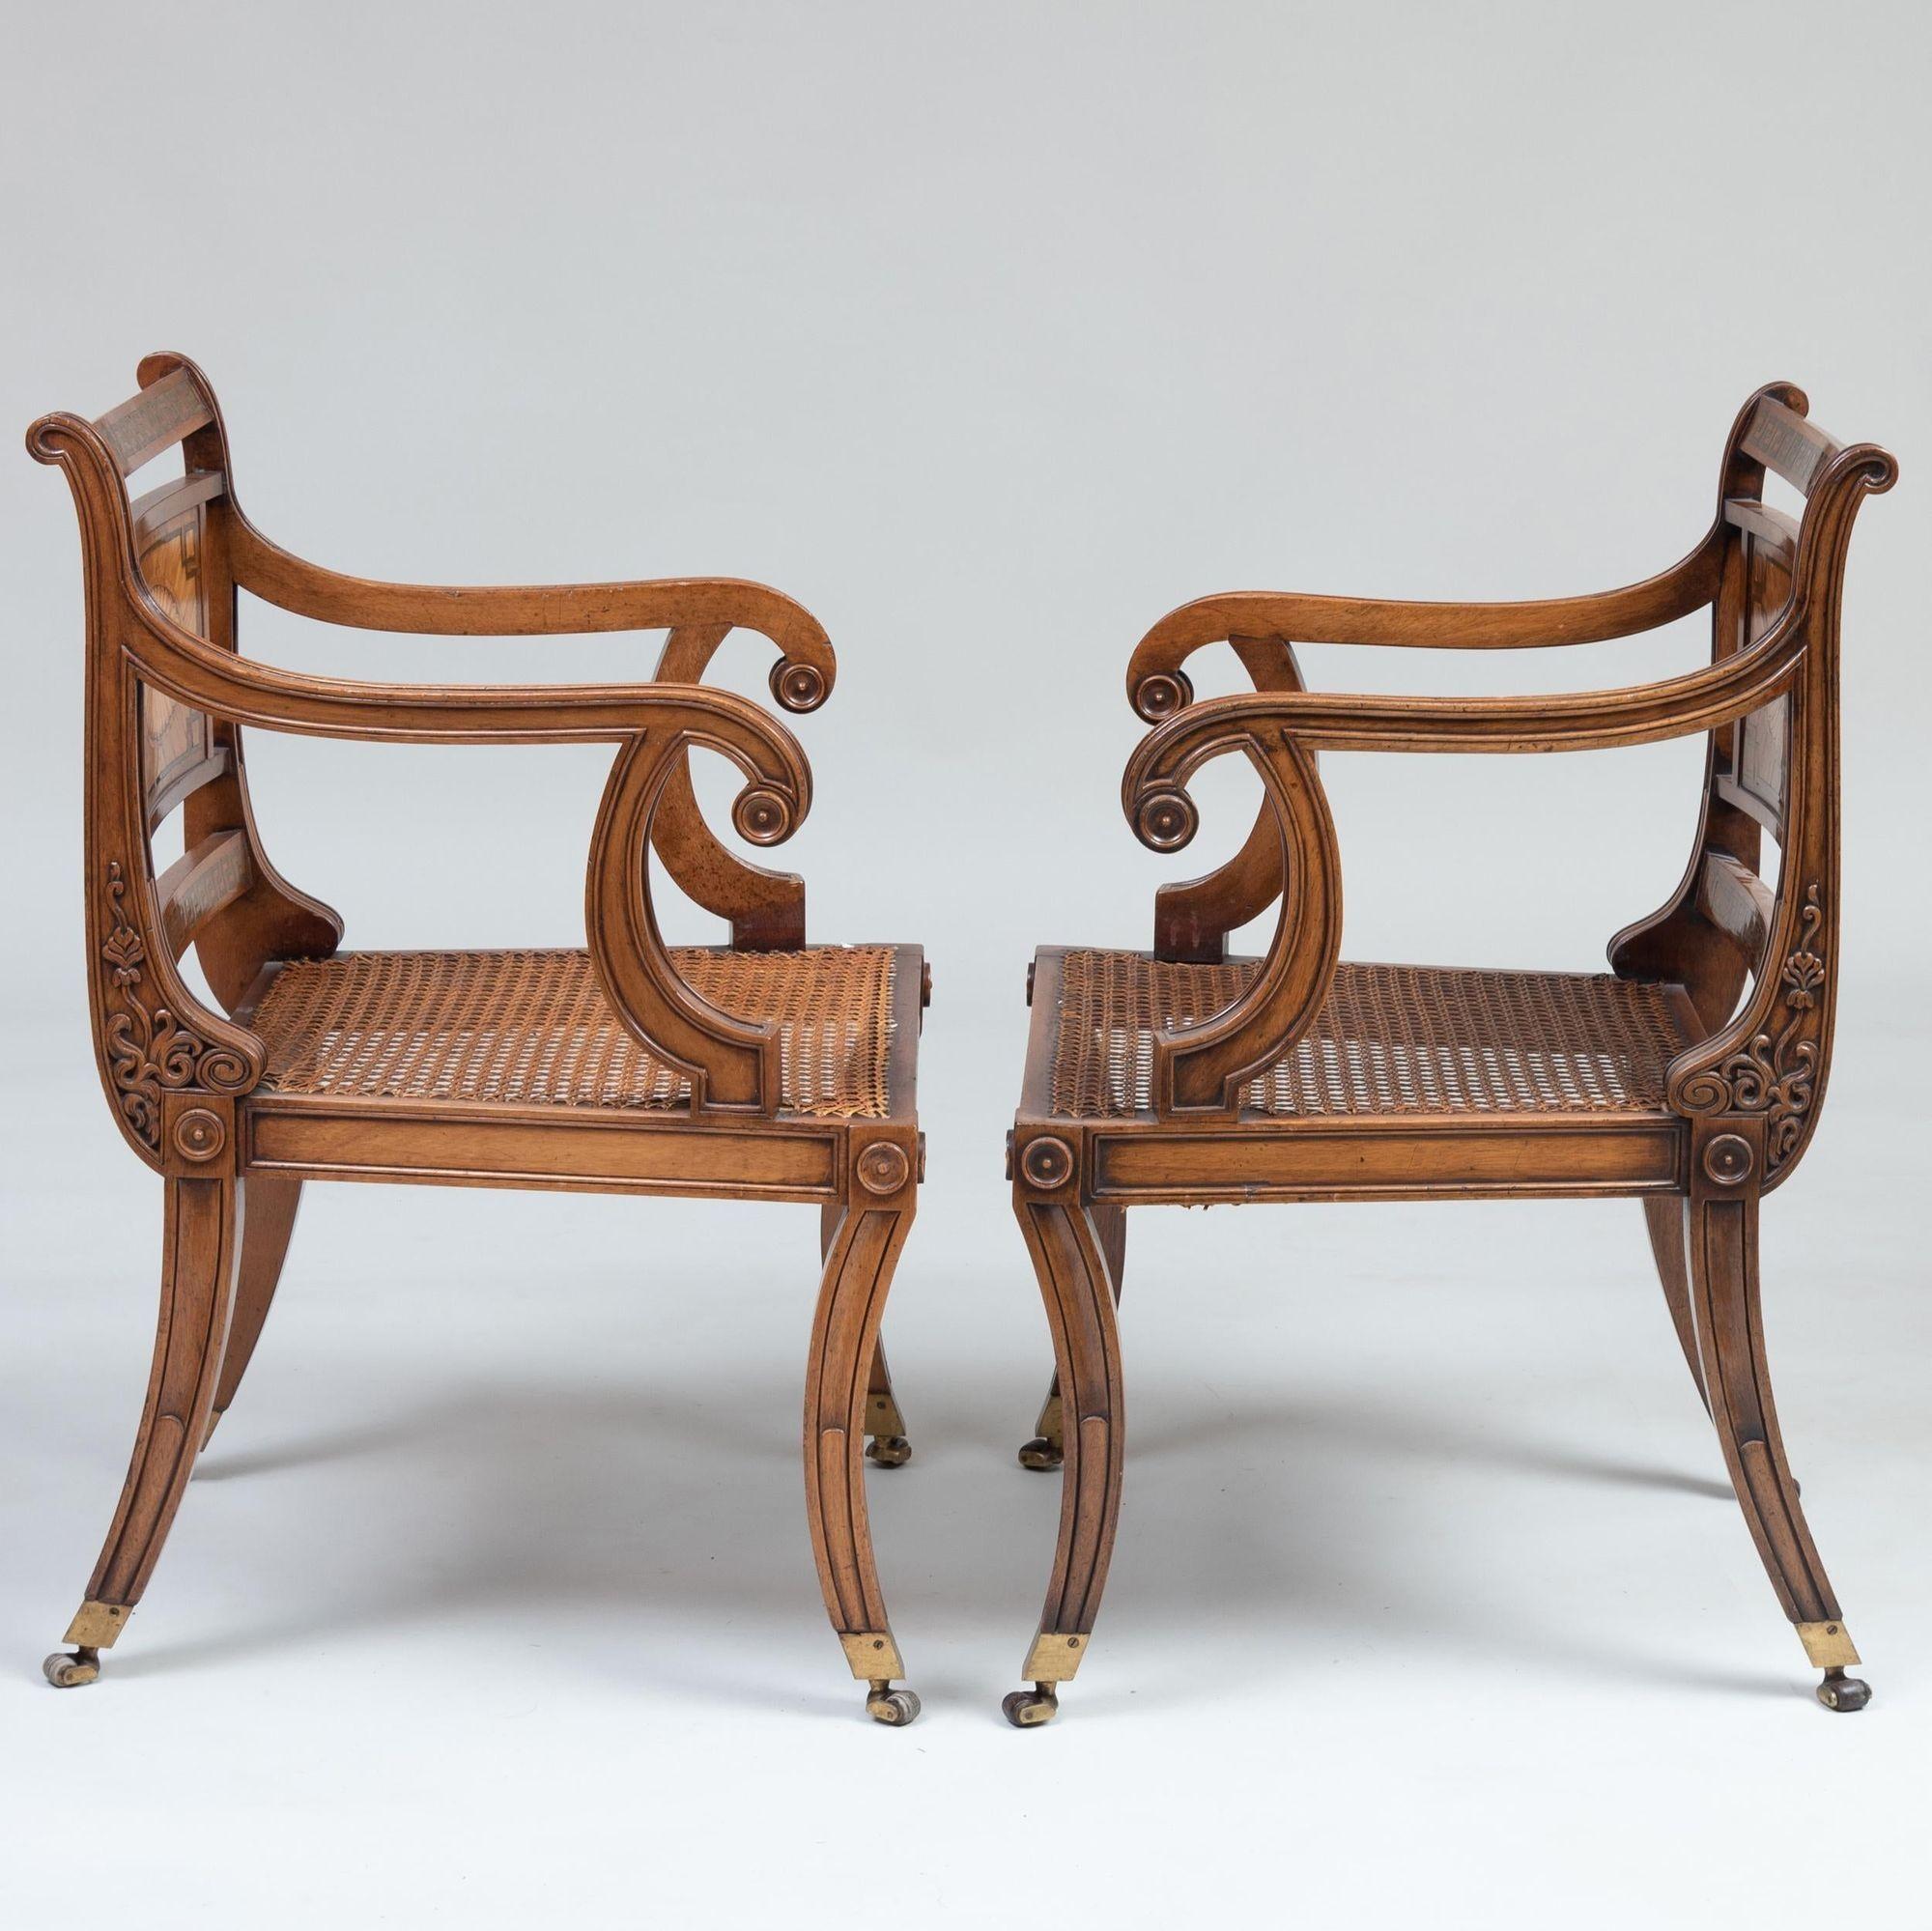 Remarkable set of 10 Regency style brass inlaid mahogany chairs with rosewood, satinwood and kingwood veneers, having paterae inlaid back panels over caned seats with leather upholstered squab cushions, standing on saber legs ending in box casters.